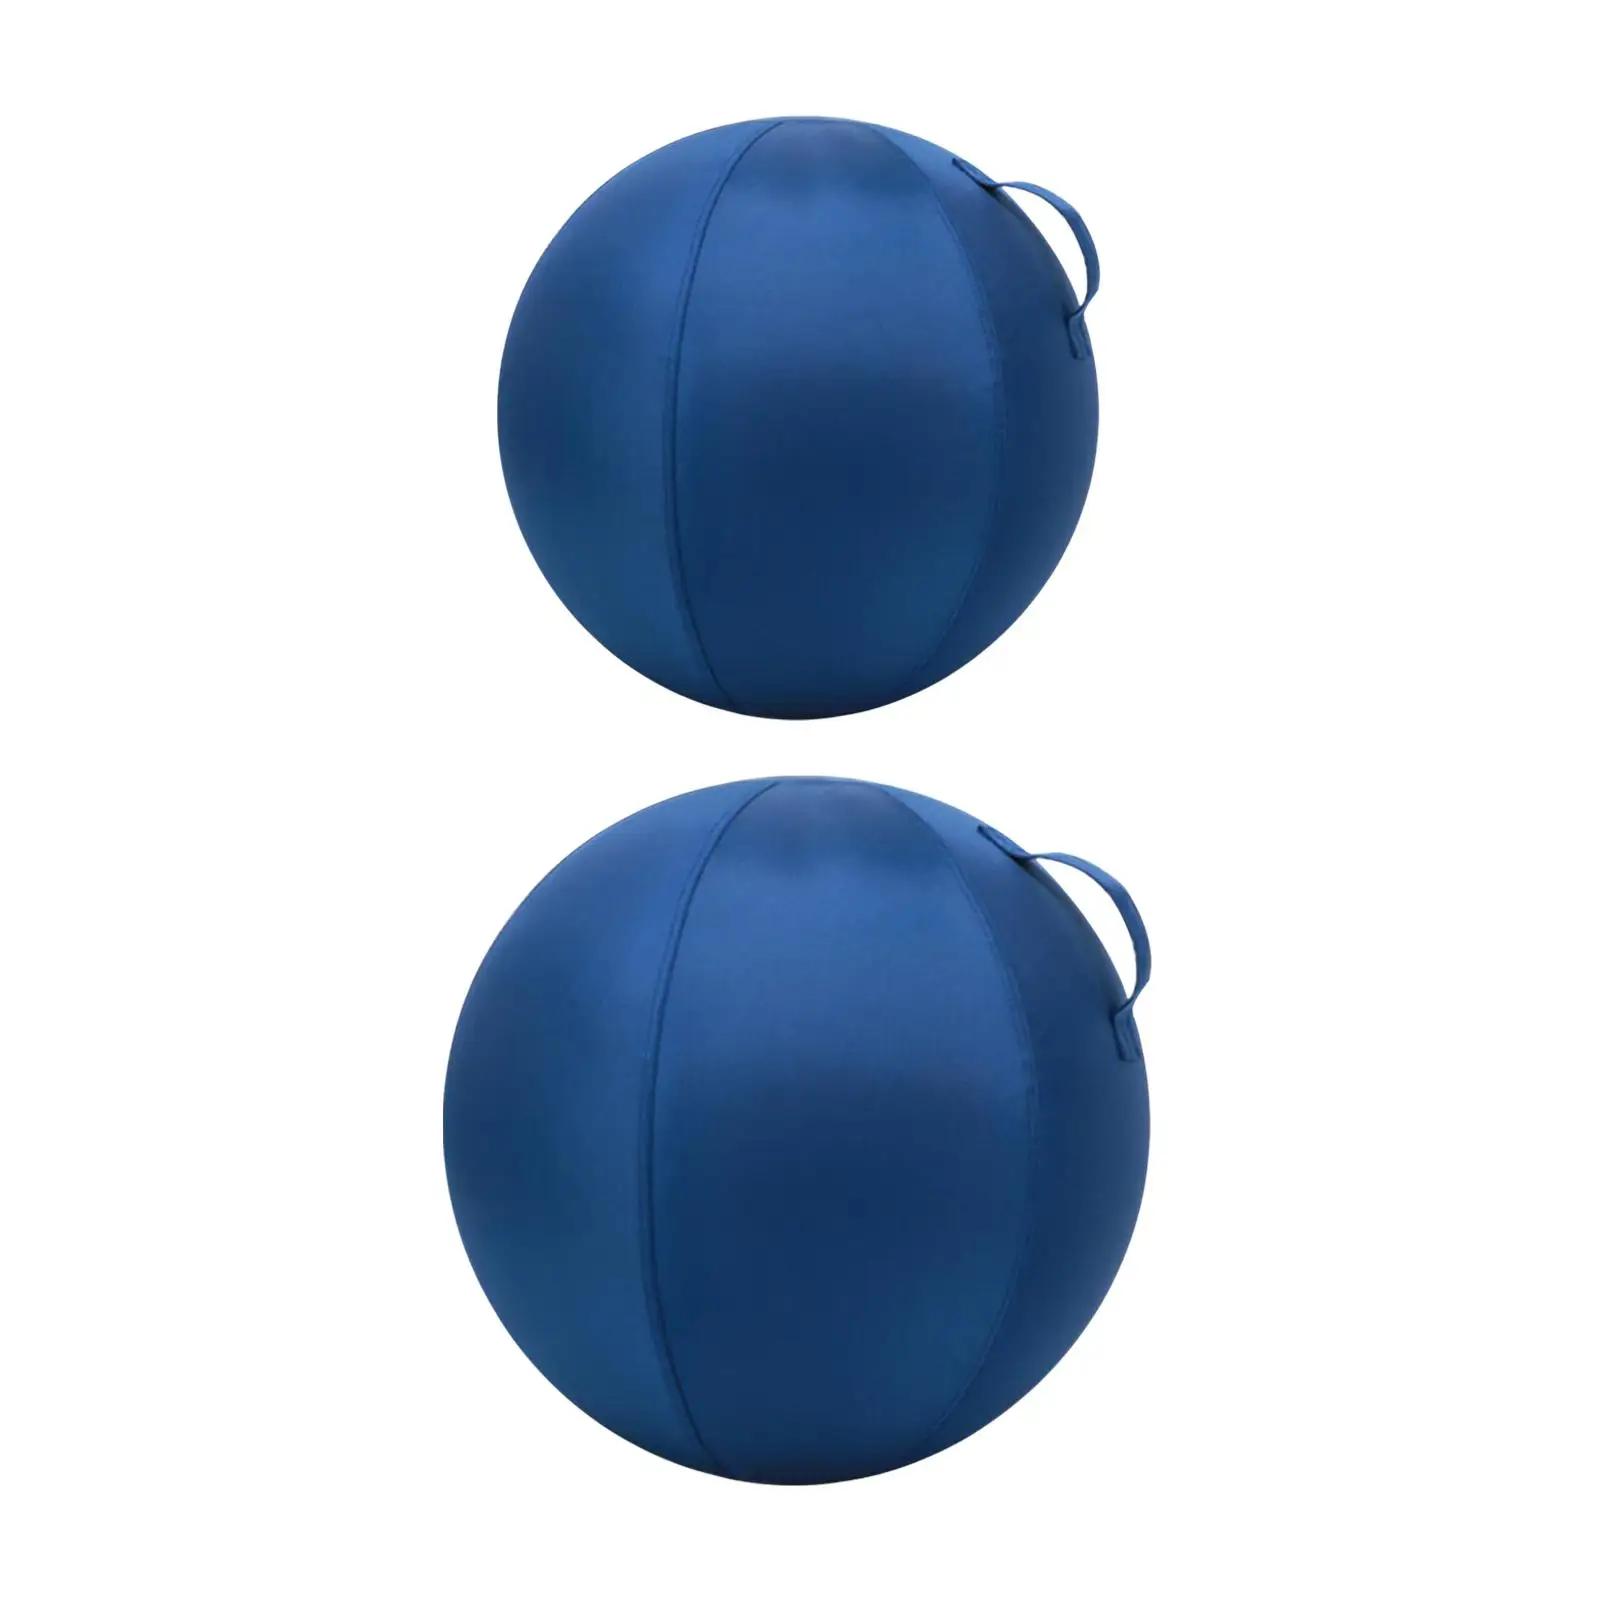 Pilates Yoga Ball Cover Folding Supplies Portable Accessories Balance Ball Cover for Home Use Protection Training Fi